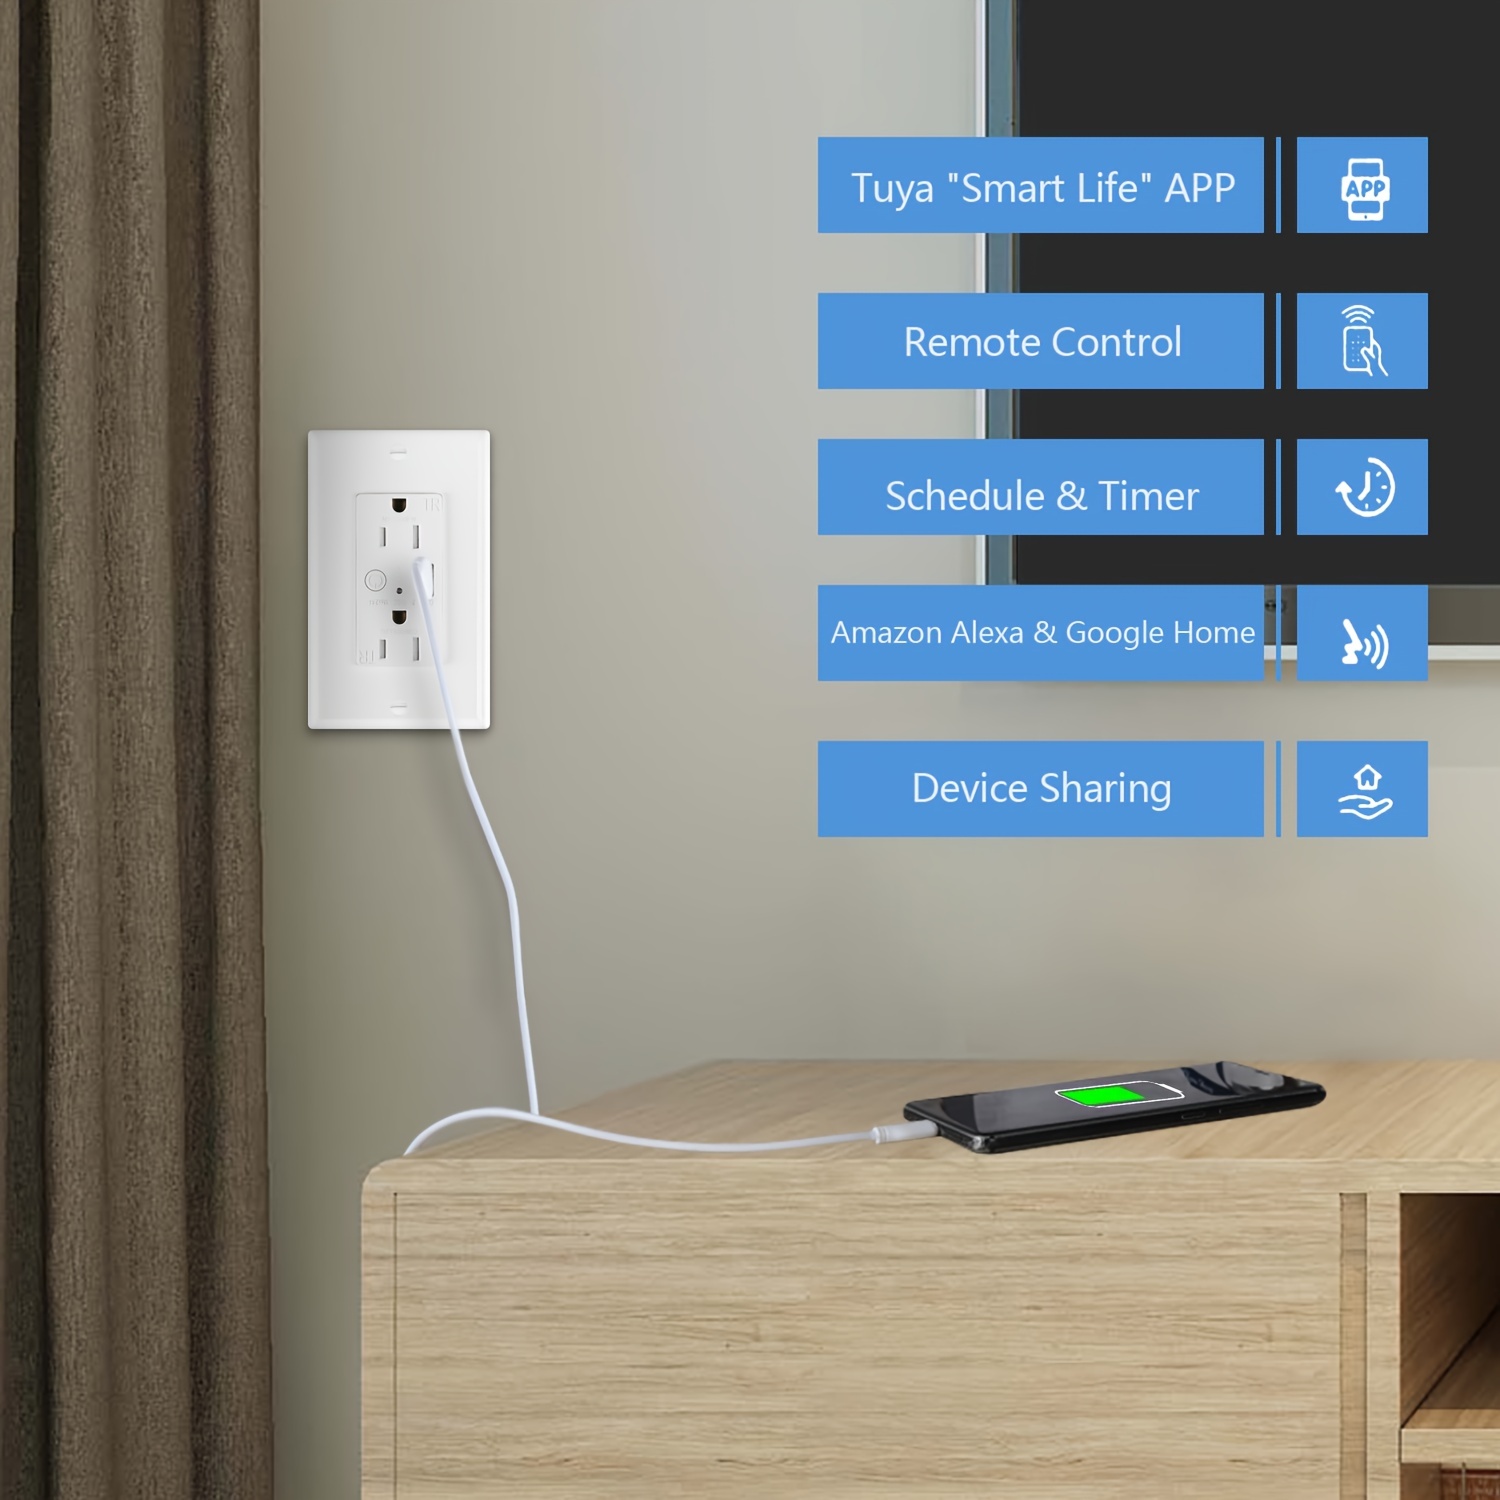 Bargain Foxes - 4 Pack TECKIN Smart Plug 13A WiFi Socket Works with Alexa  👉 Reduced to £27.99 with code: 3NPJSLGN 📌 Apply 30% OFF on TECKIN Smart  Plug 13A WiFi Socket